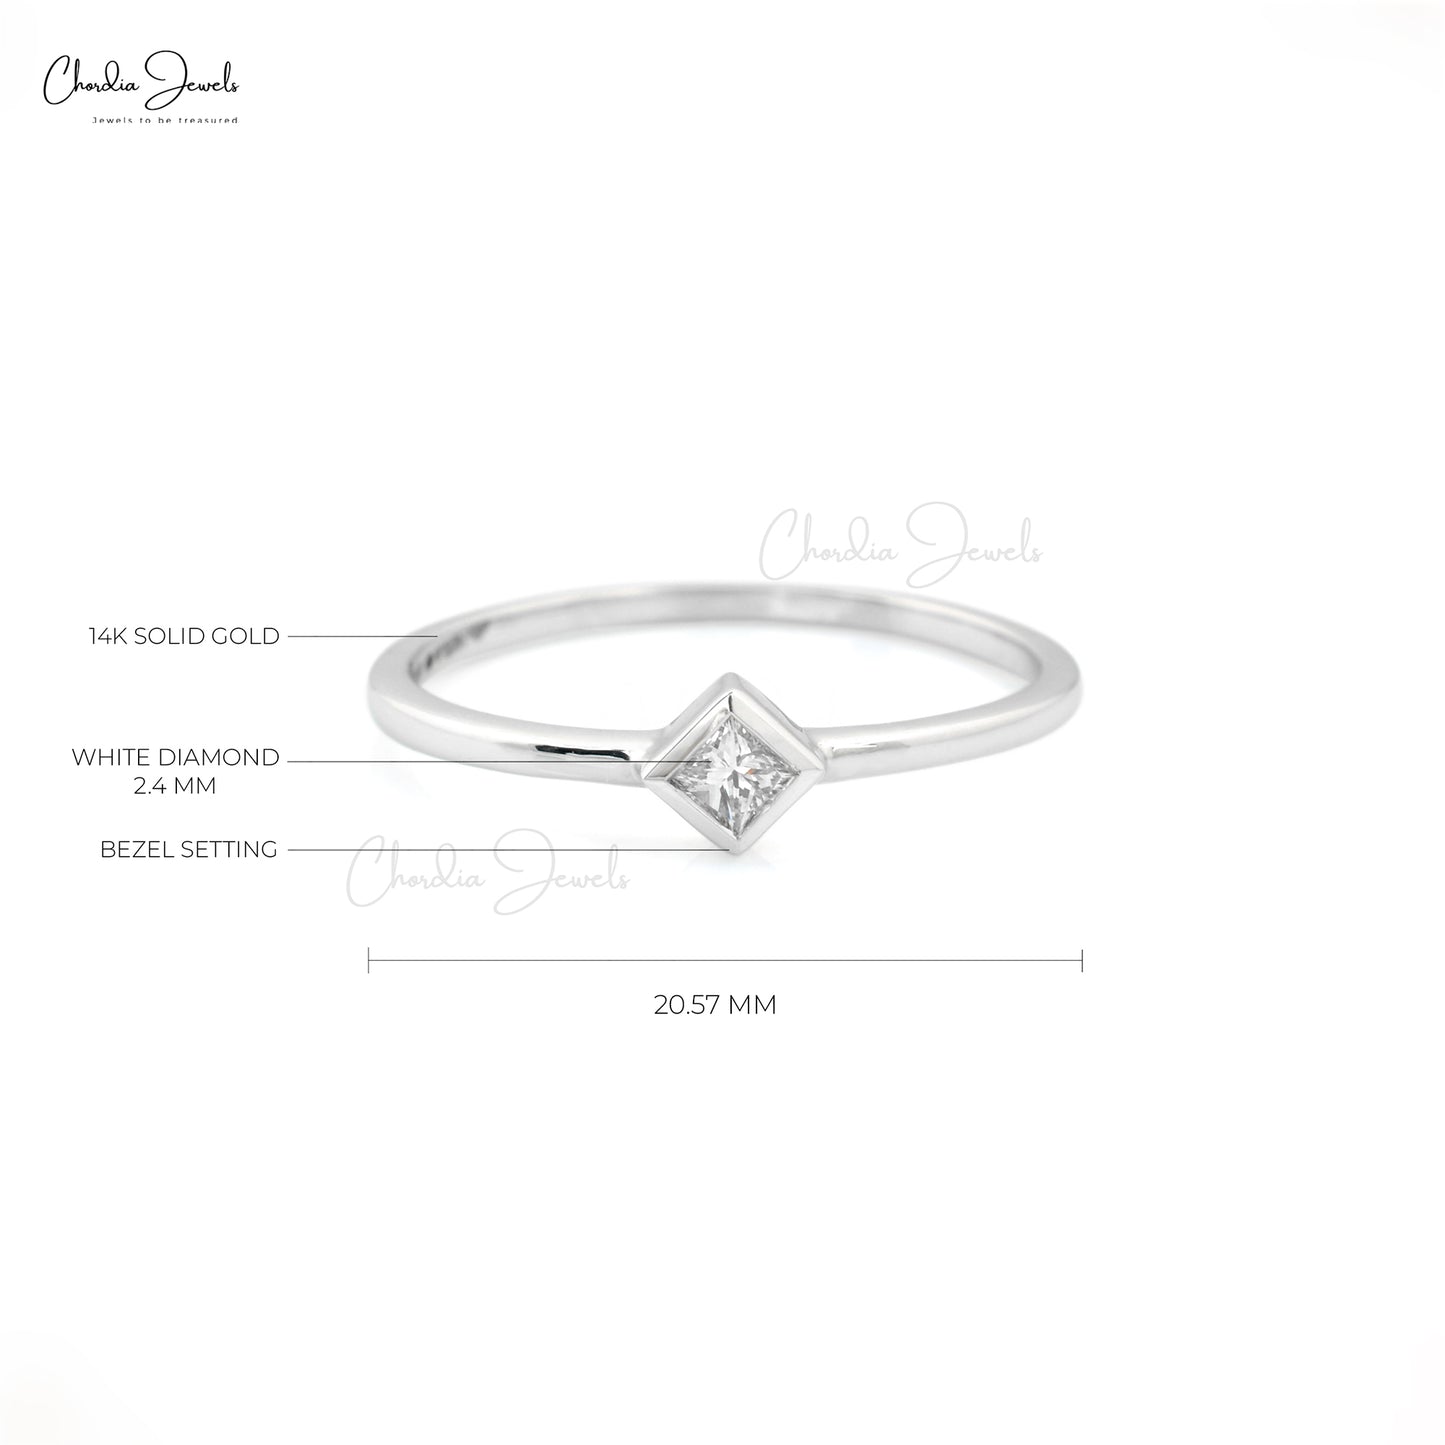 Load image into Gallery viewer, White Diamond Solitaire Ring 2.4mm Square Princess Cut Ring Size US-6 14k Solid White Gold Ring For Wedding
